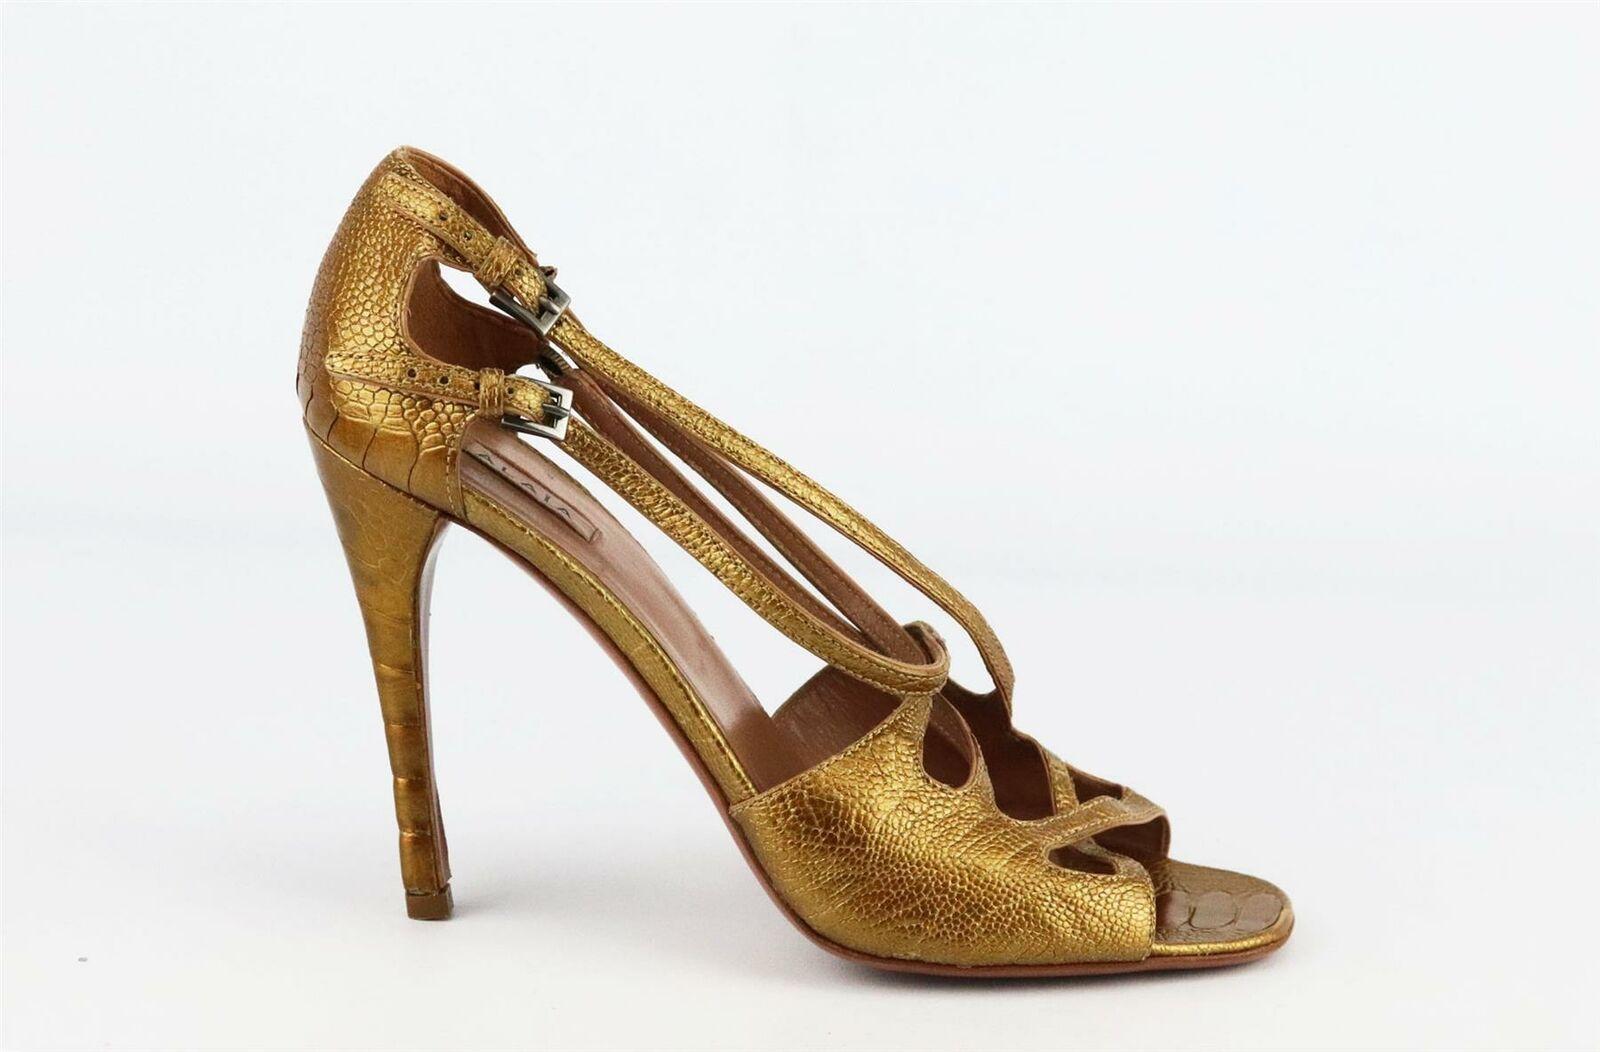 These Alaïa sandals have been made in Italy from metallic croc-effect leather, they have a striking crossover strappy profile and are set on a stiletto heels.
Heel measures approximately 101 mm/ 4 inches.
Gold croc-effect leather.
Buckle fastening